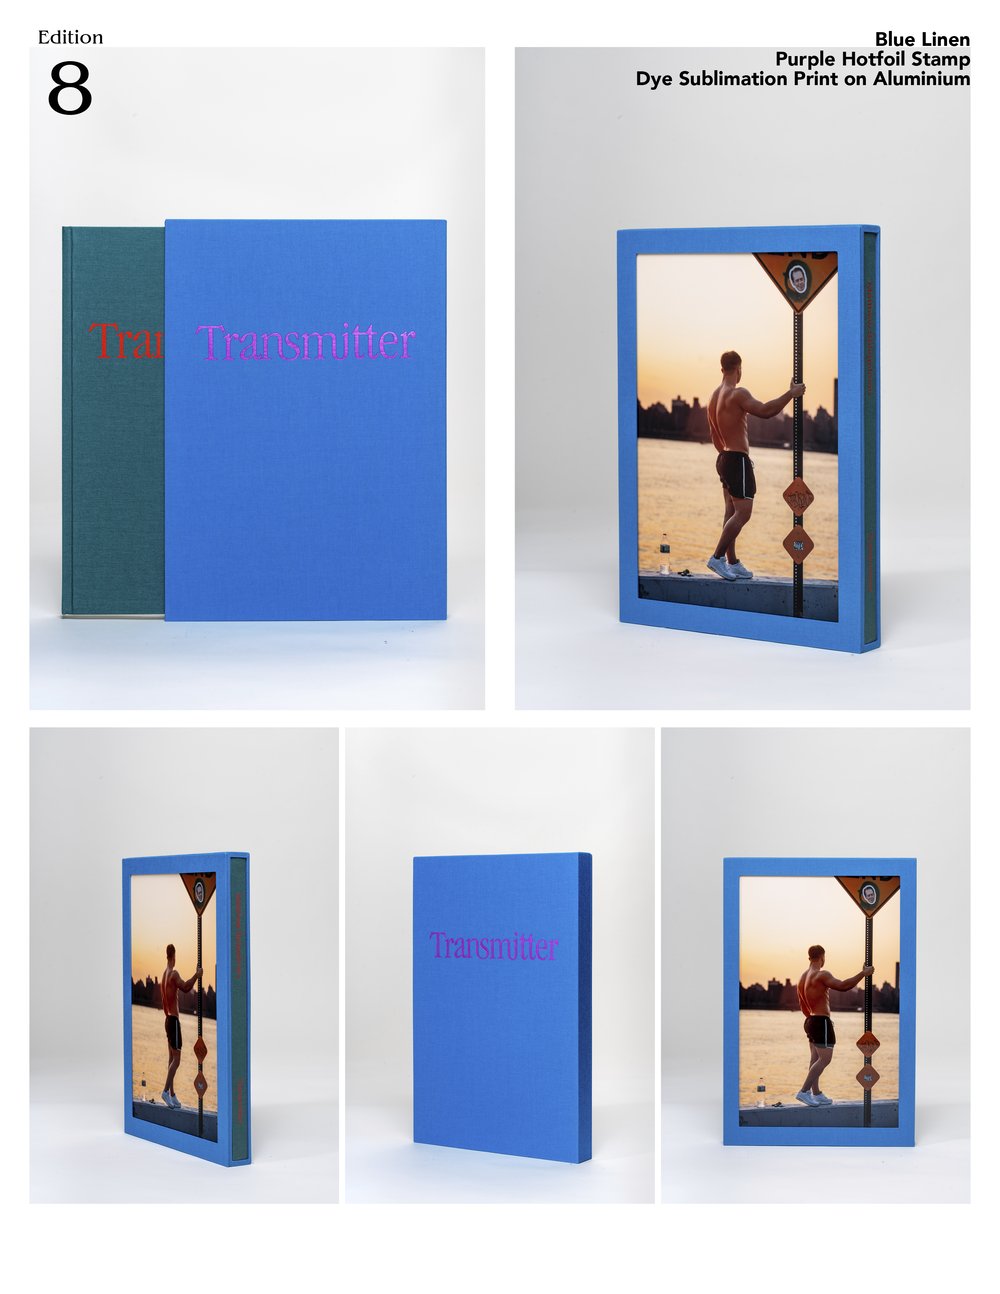 Transmitter Special Editions 7, 8, 9, and 10 - Multiple colors